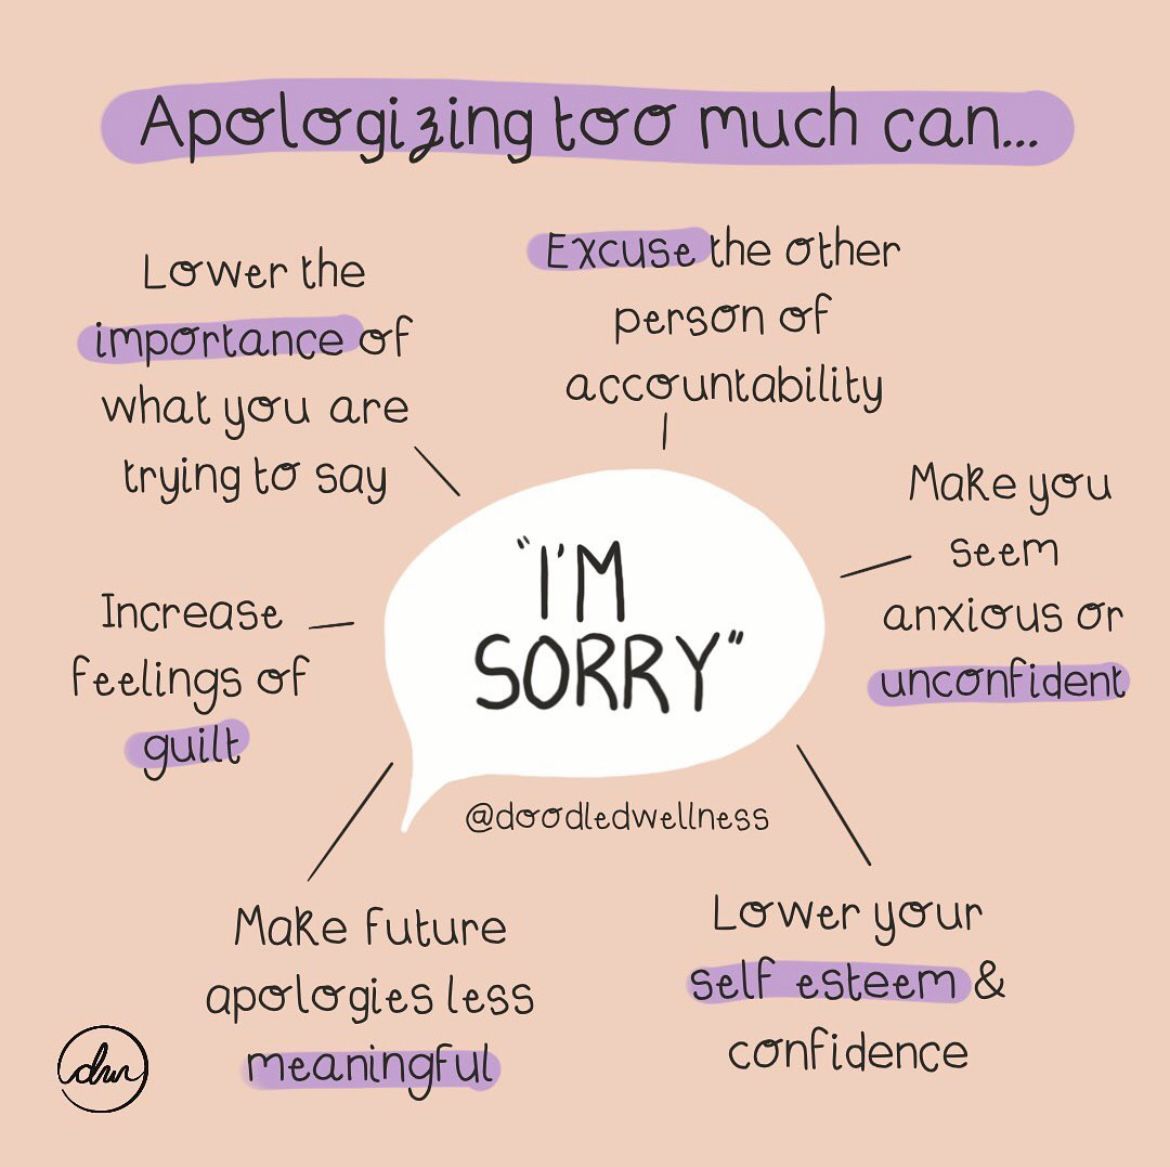 Apologising too much can make future apologies less meaningful